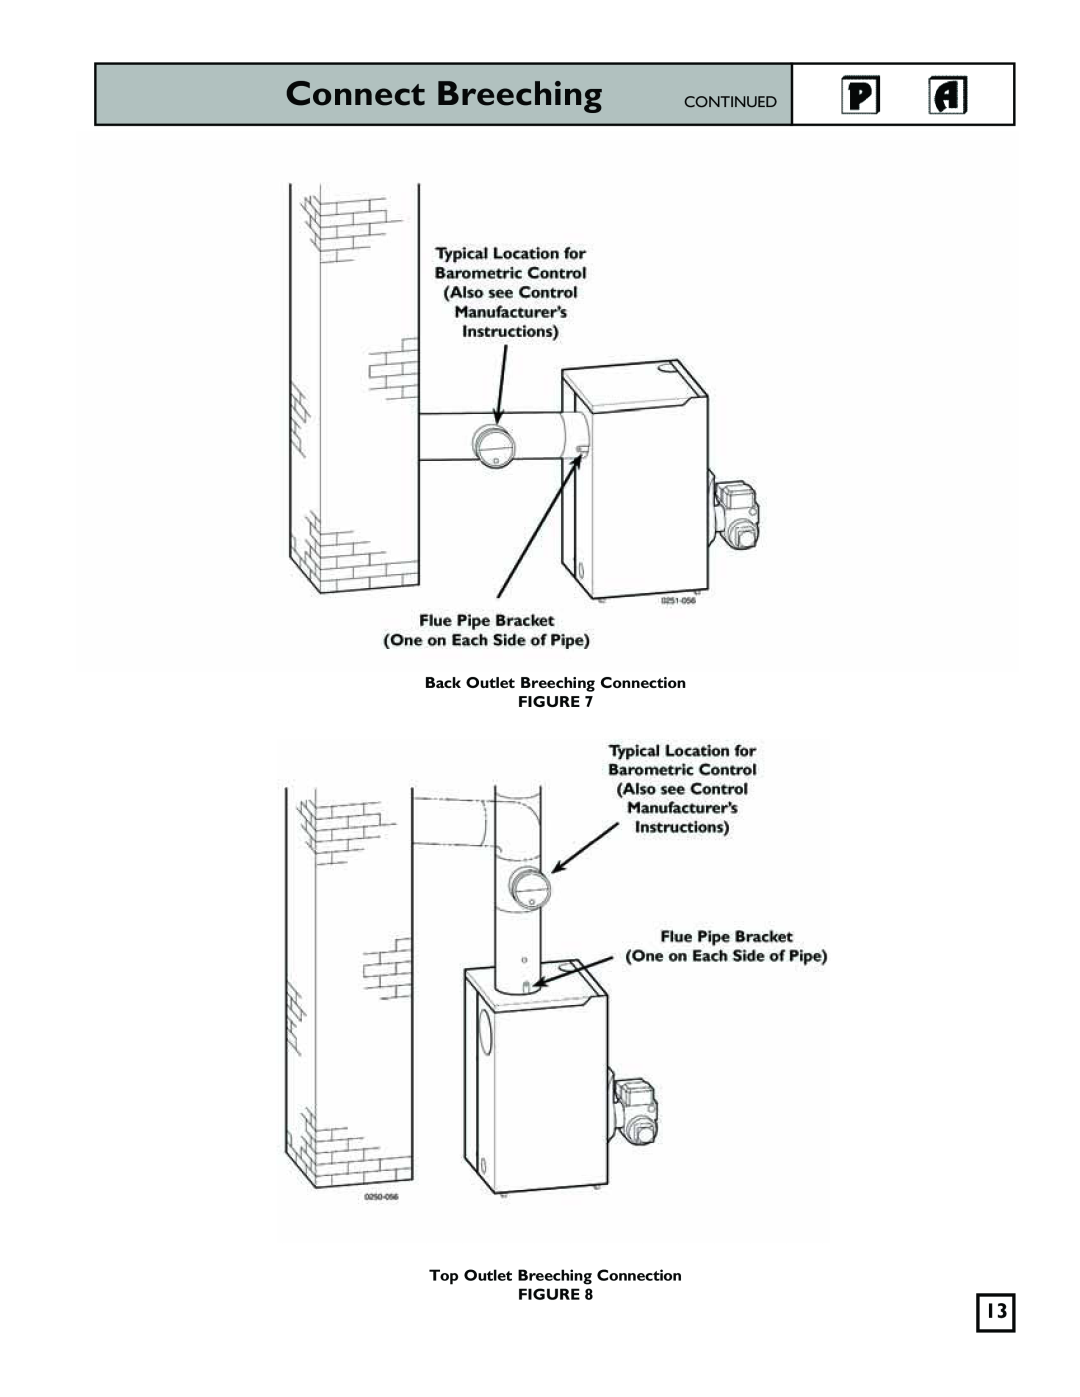 Weil-McLain 550-141-829/1201 manual Connect Breeching, Continued, Back Outlet Breeching Connection FIGURE 